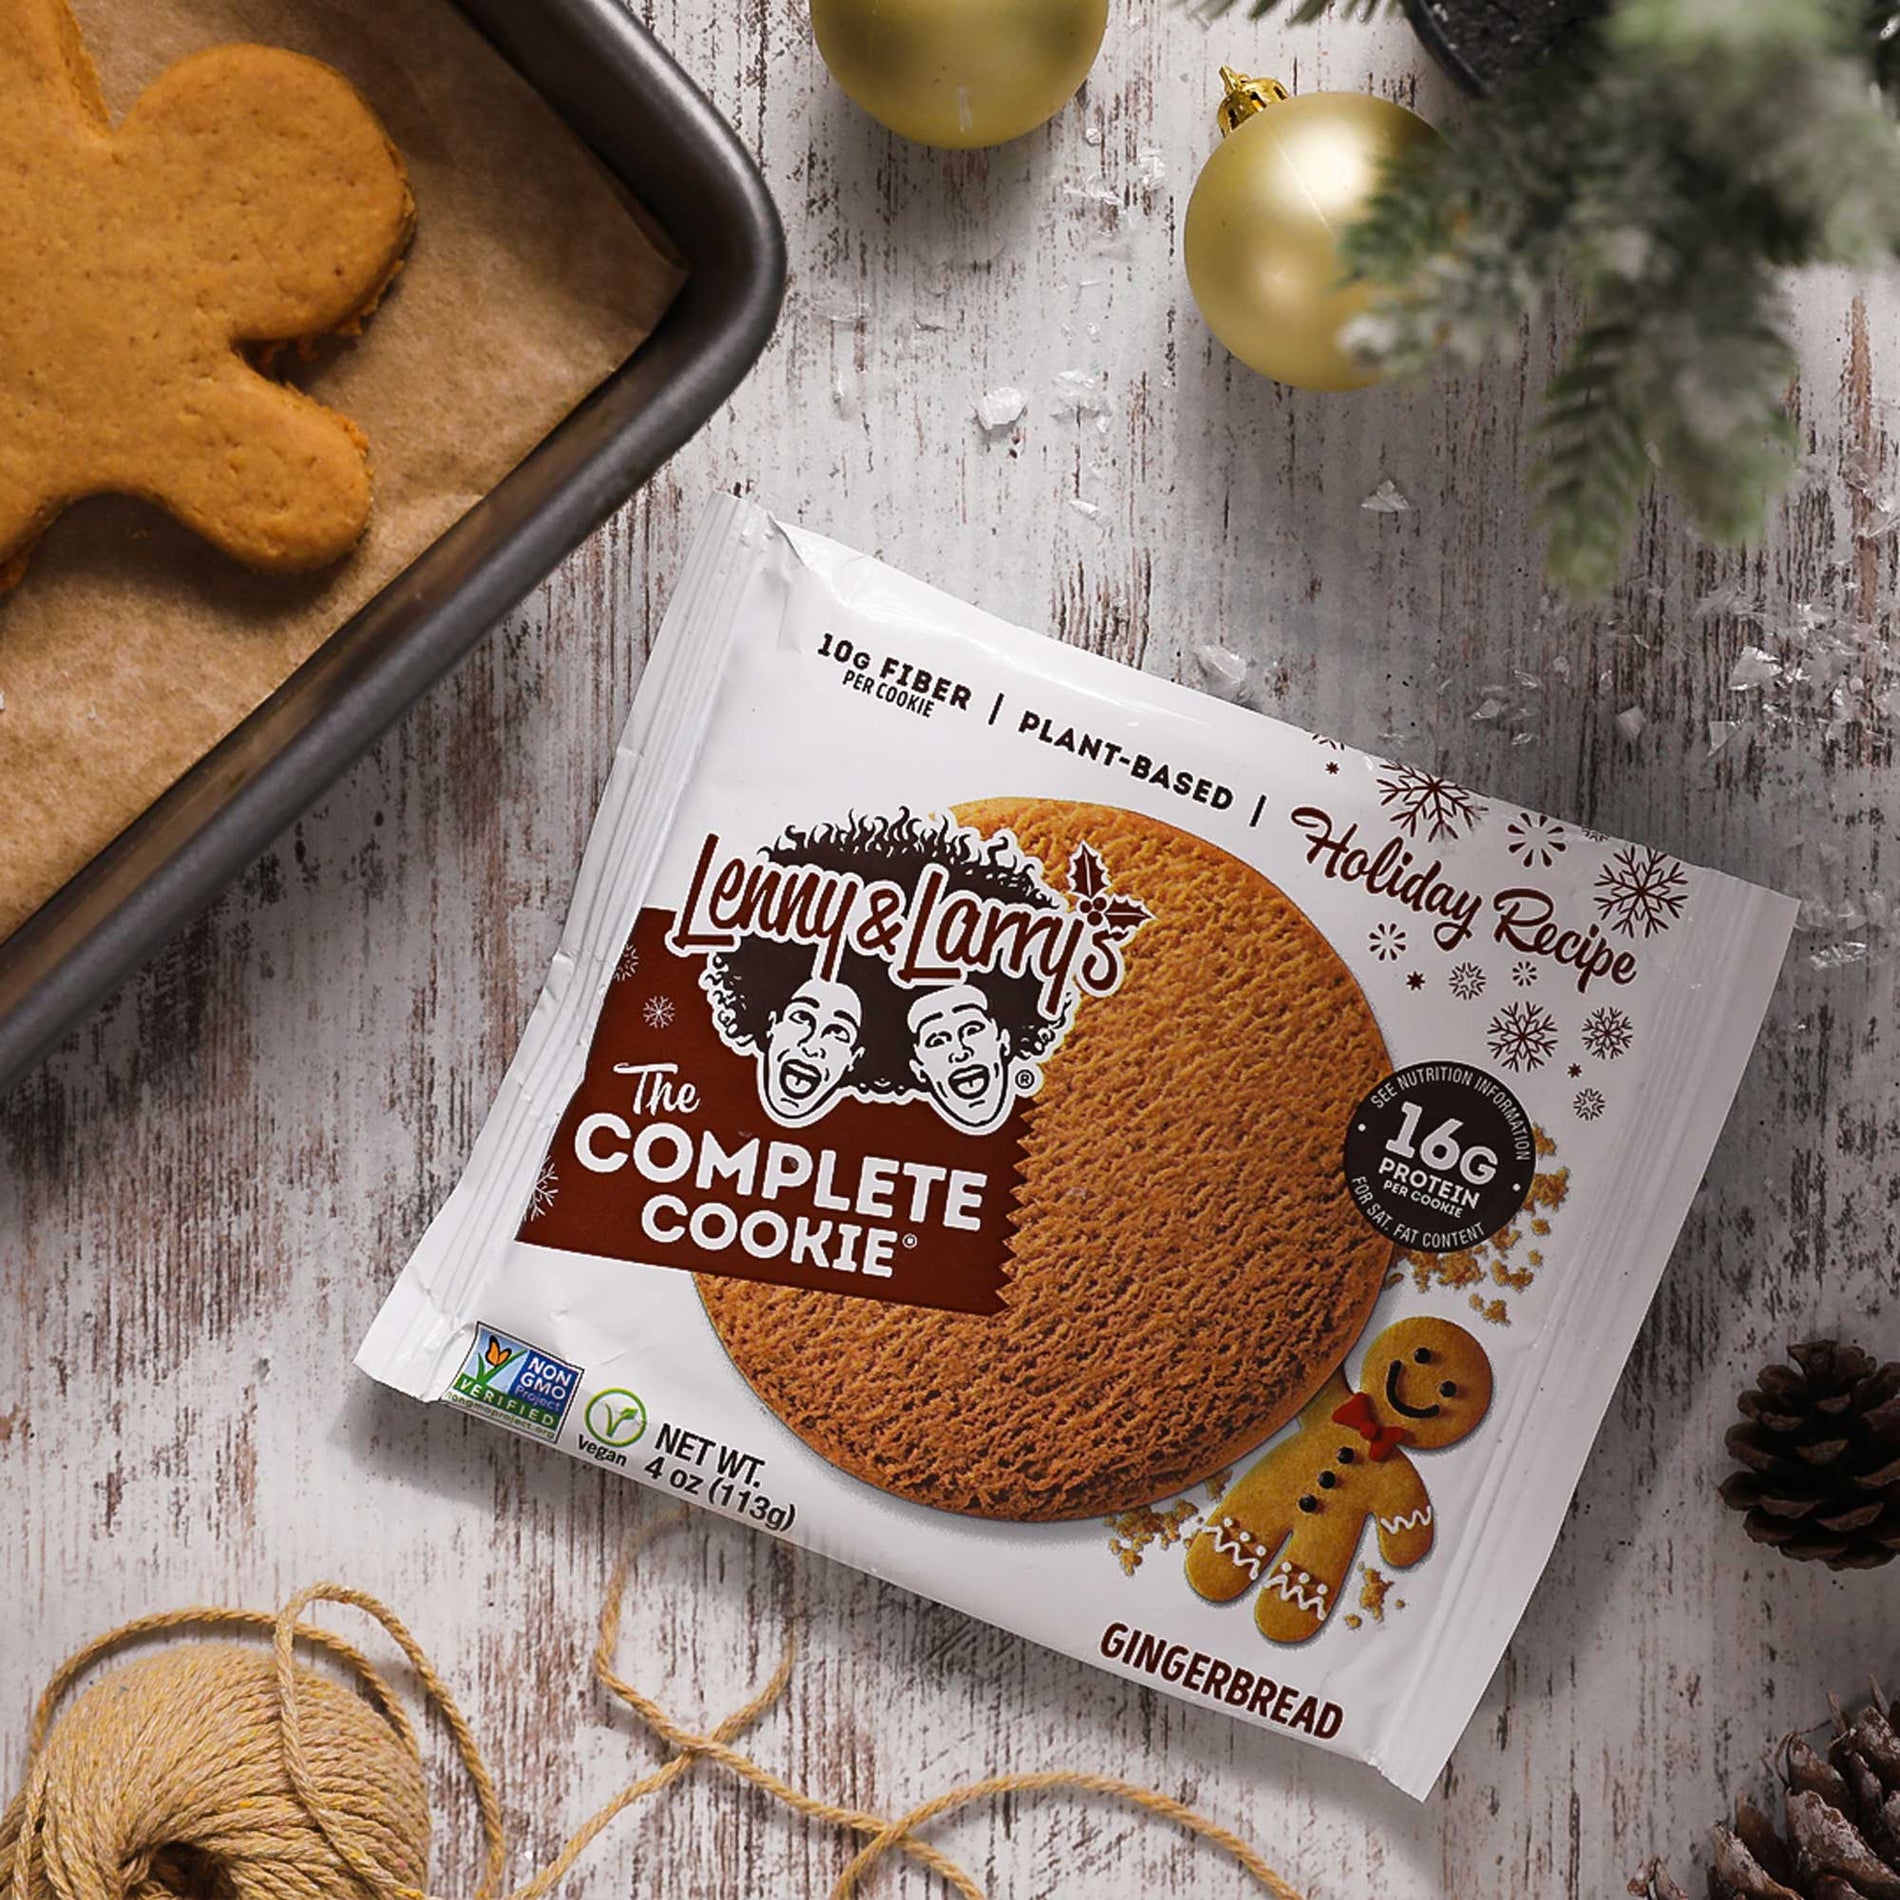 All the Holiday-Flavored Foods You Can Buy Well Before the Holiday Season